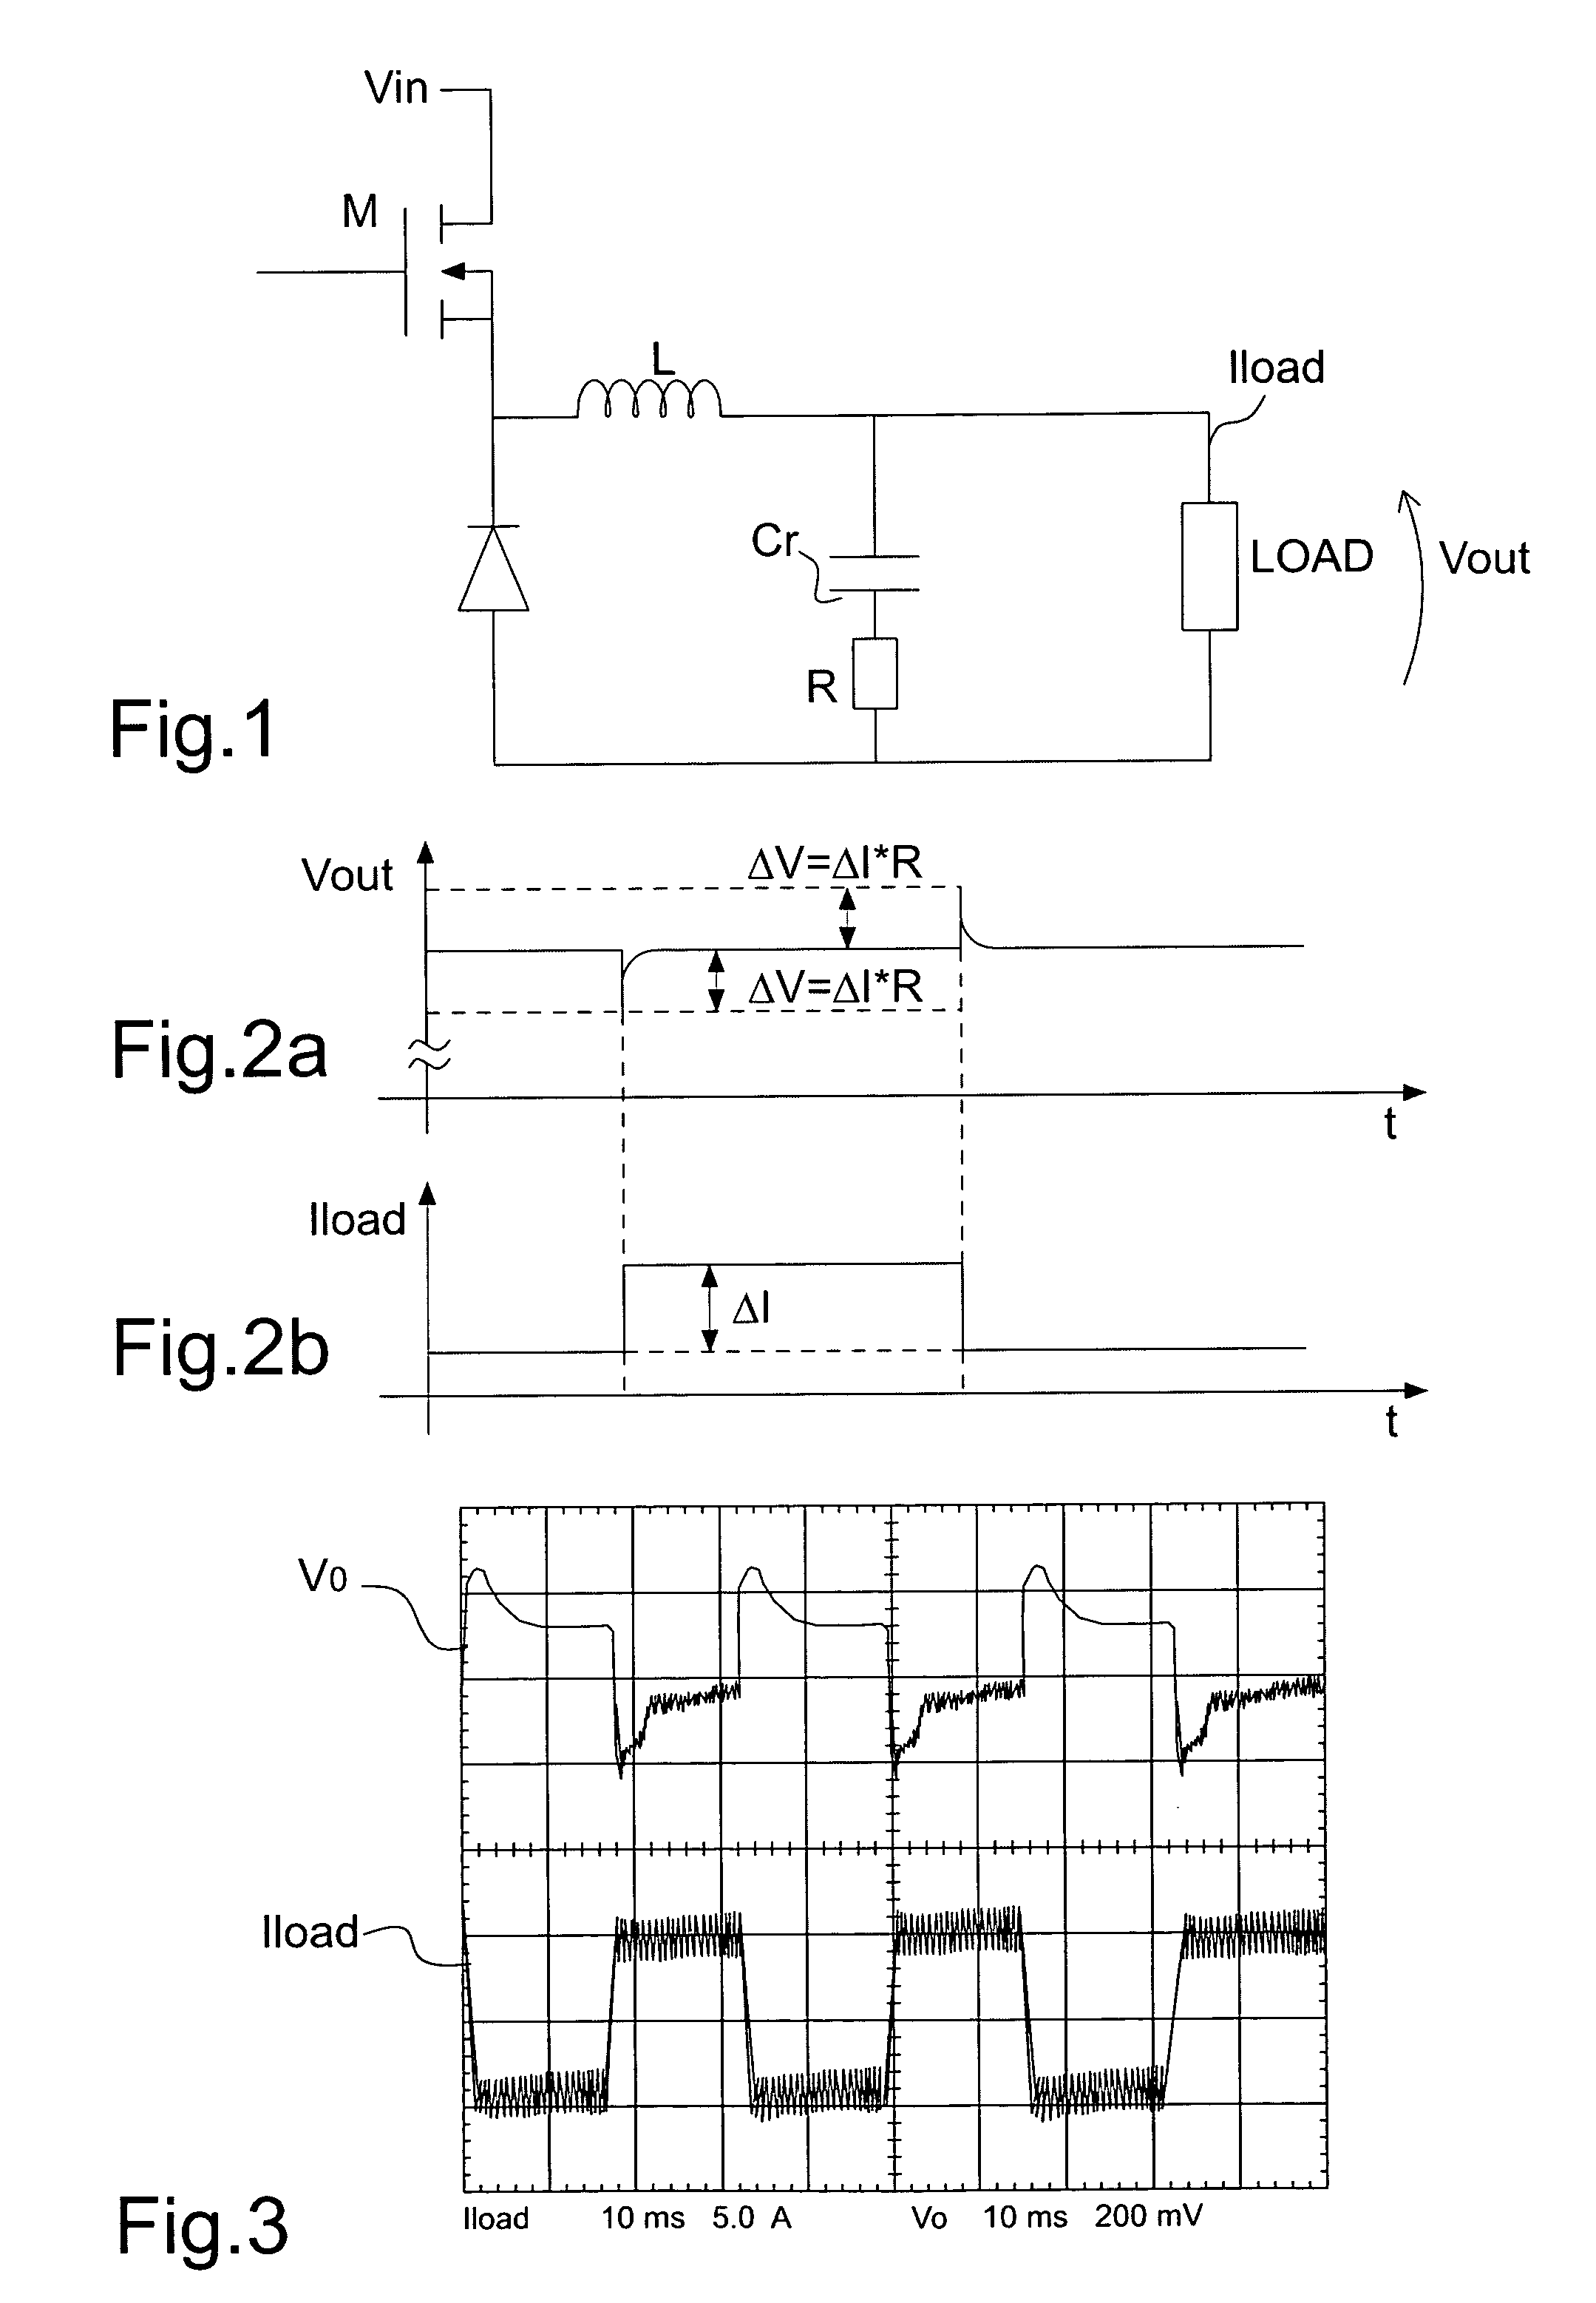 Digital control apparatus for a switching DC-DC converter